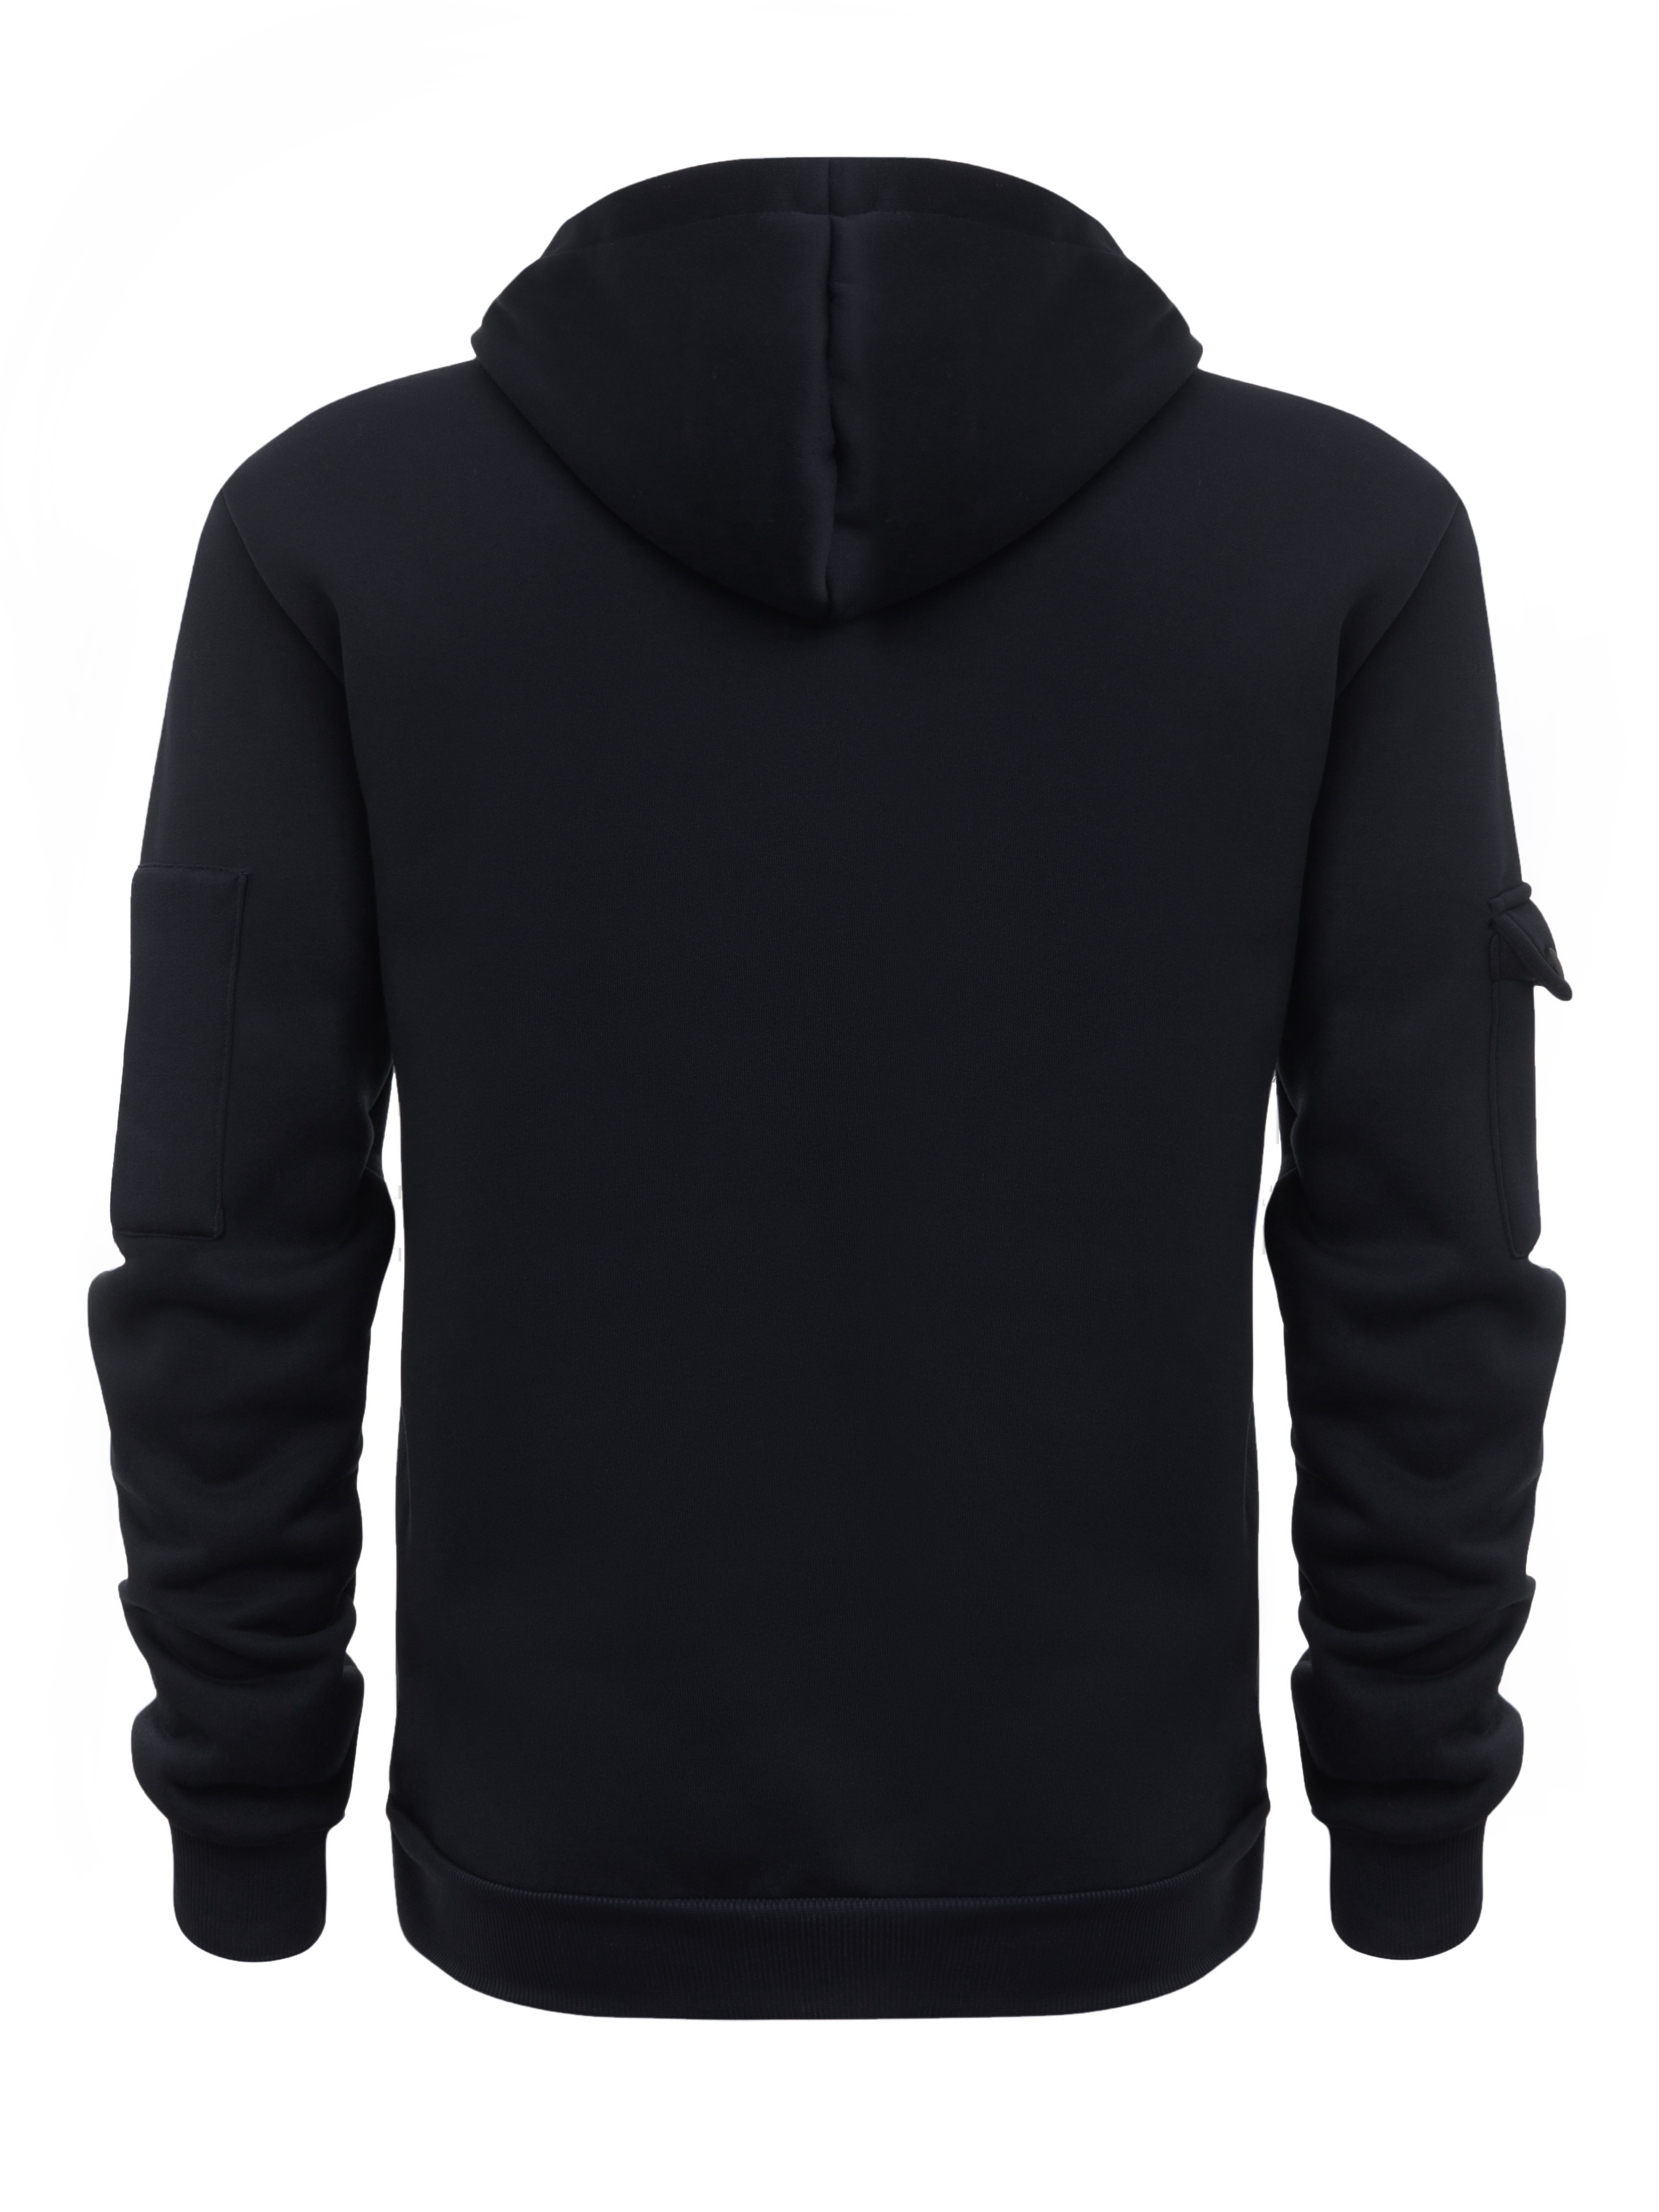 mens fashion half zipped sports hoodie with pockets casual athletic pullover comfortable fit sweatshirt with hood details 15